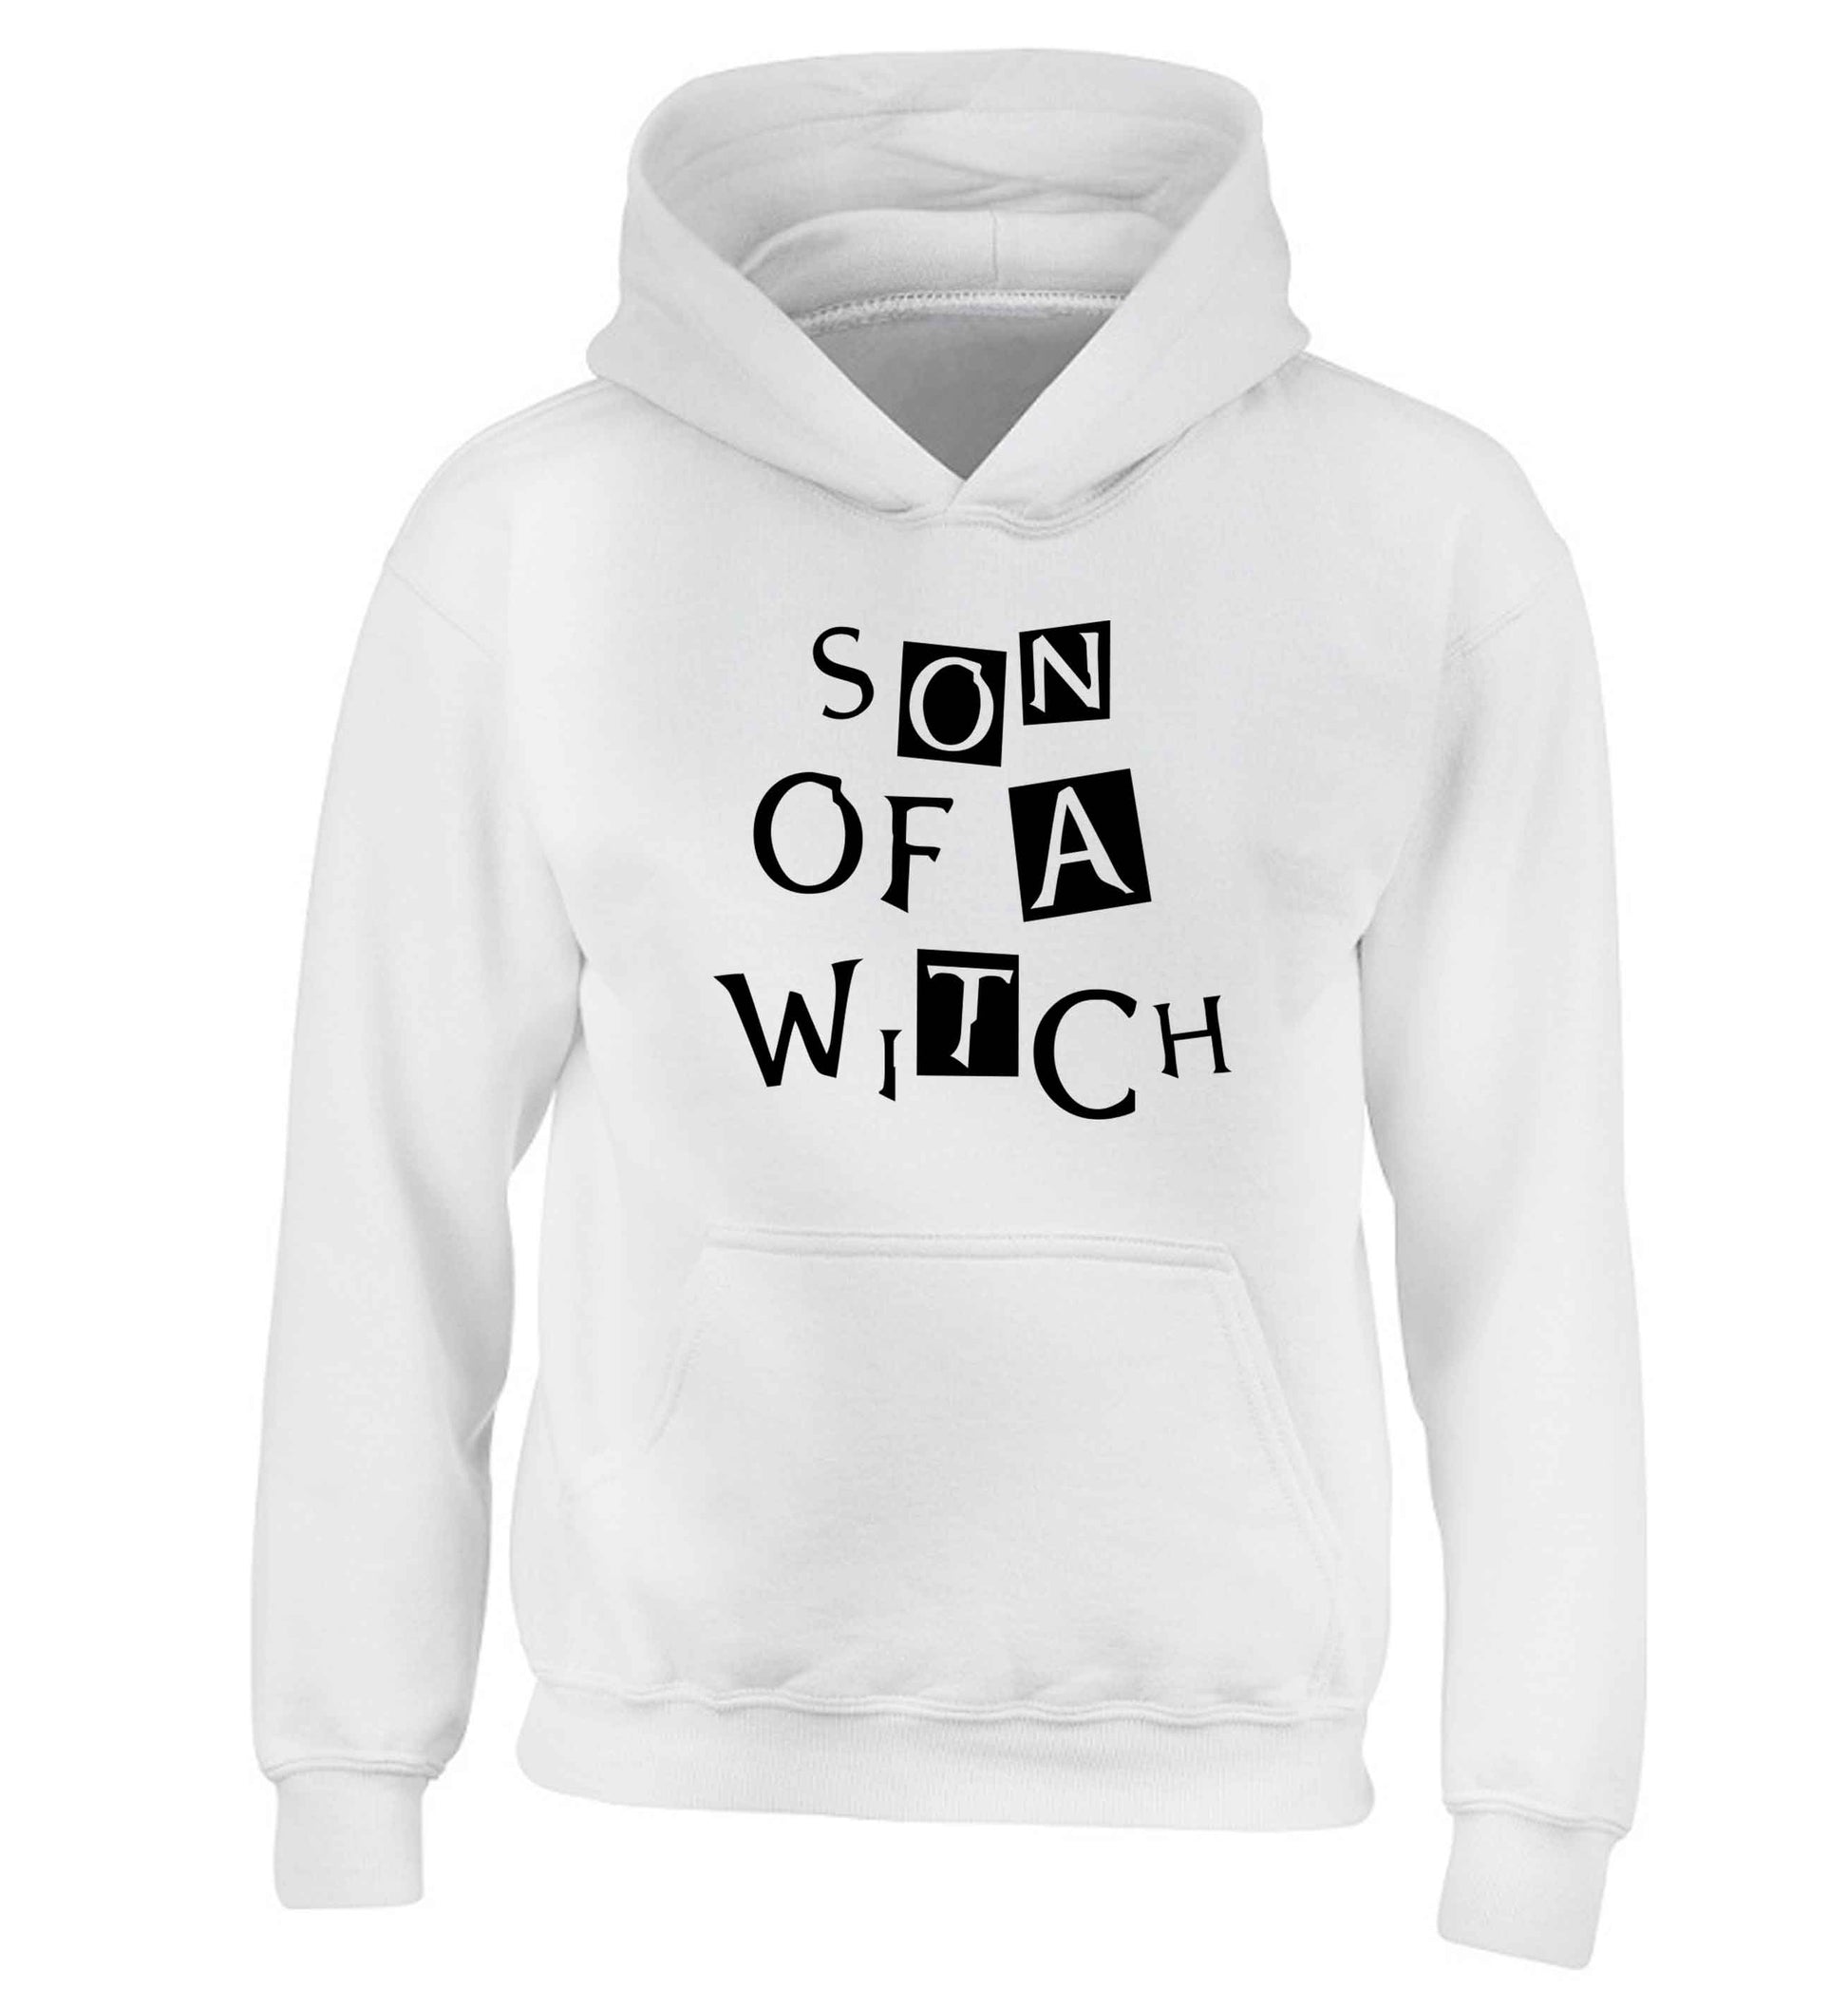 Son of a witch children's white hoodie 12-13 Years